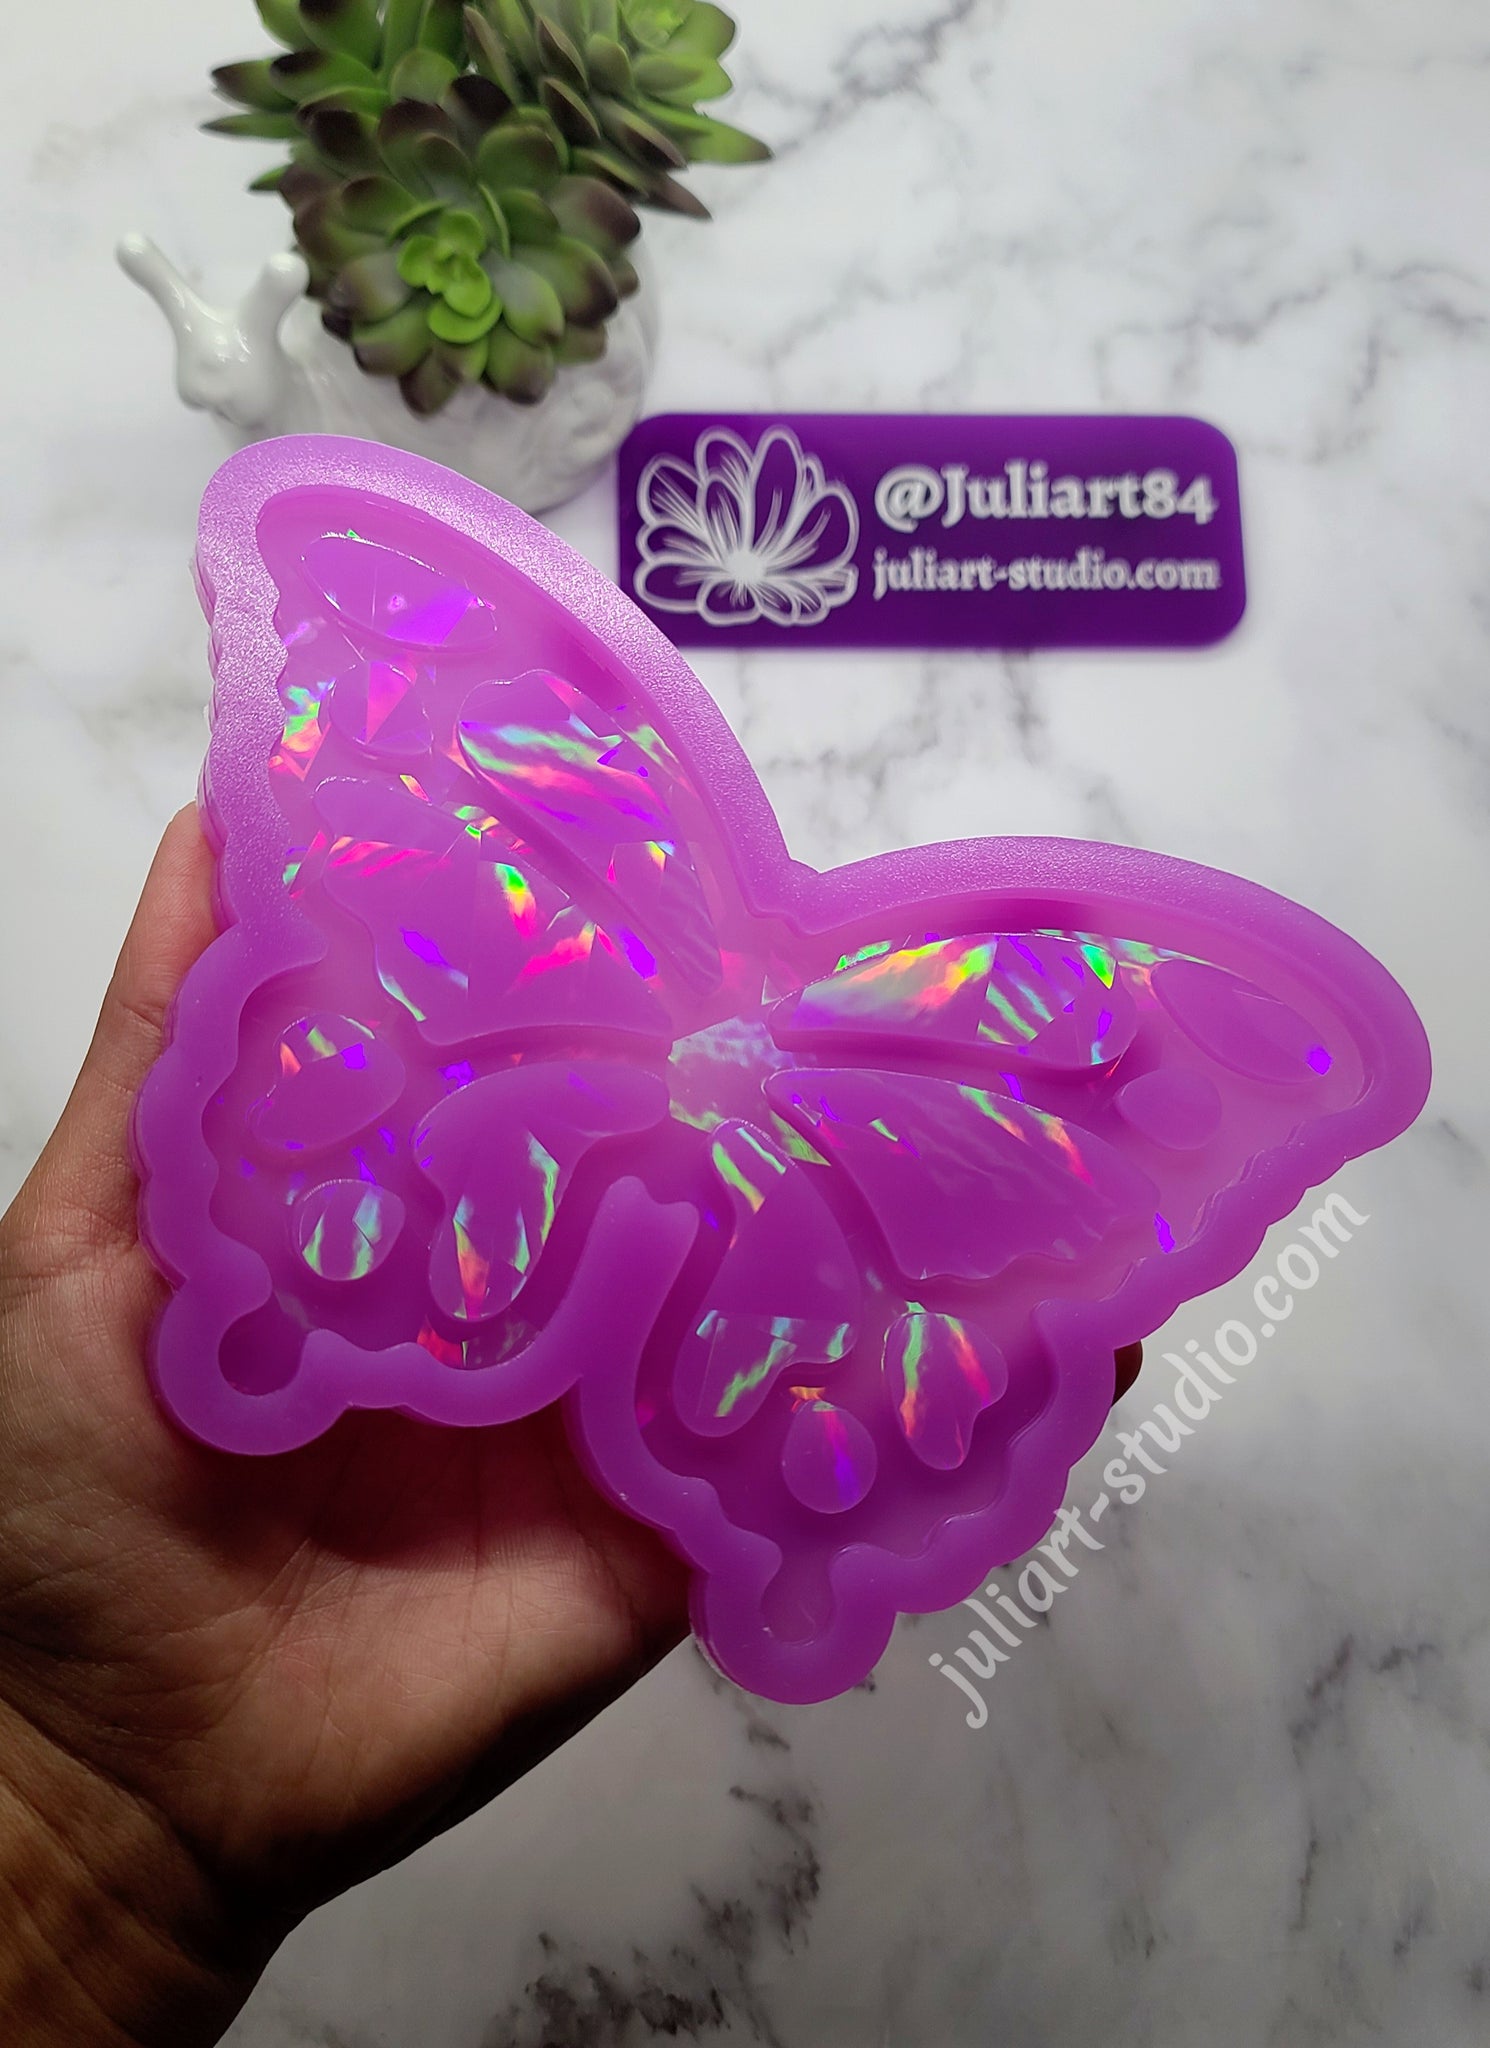 8.0x6.0x0.5 Butterfly Relief 1 Silicone Mold